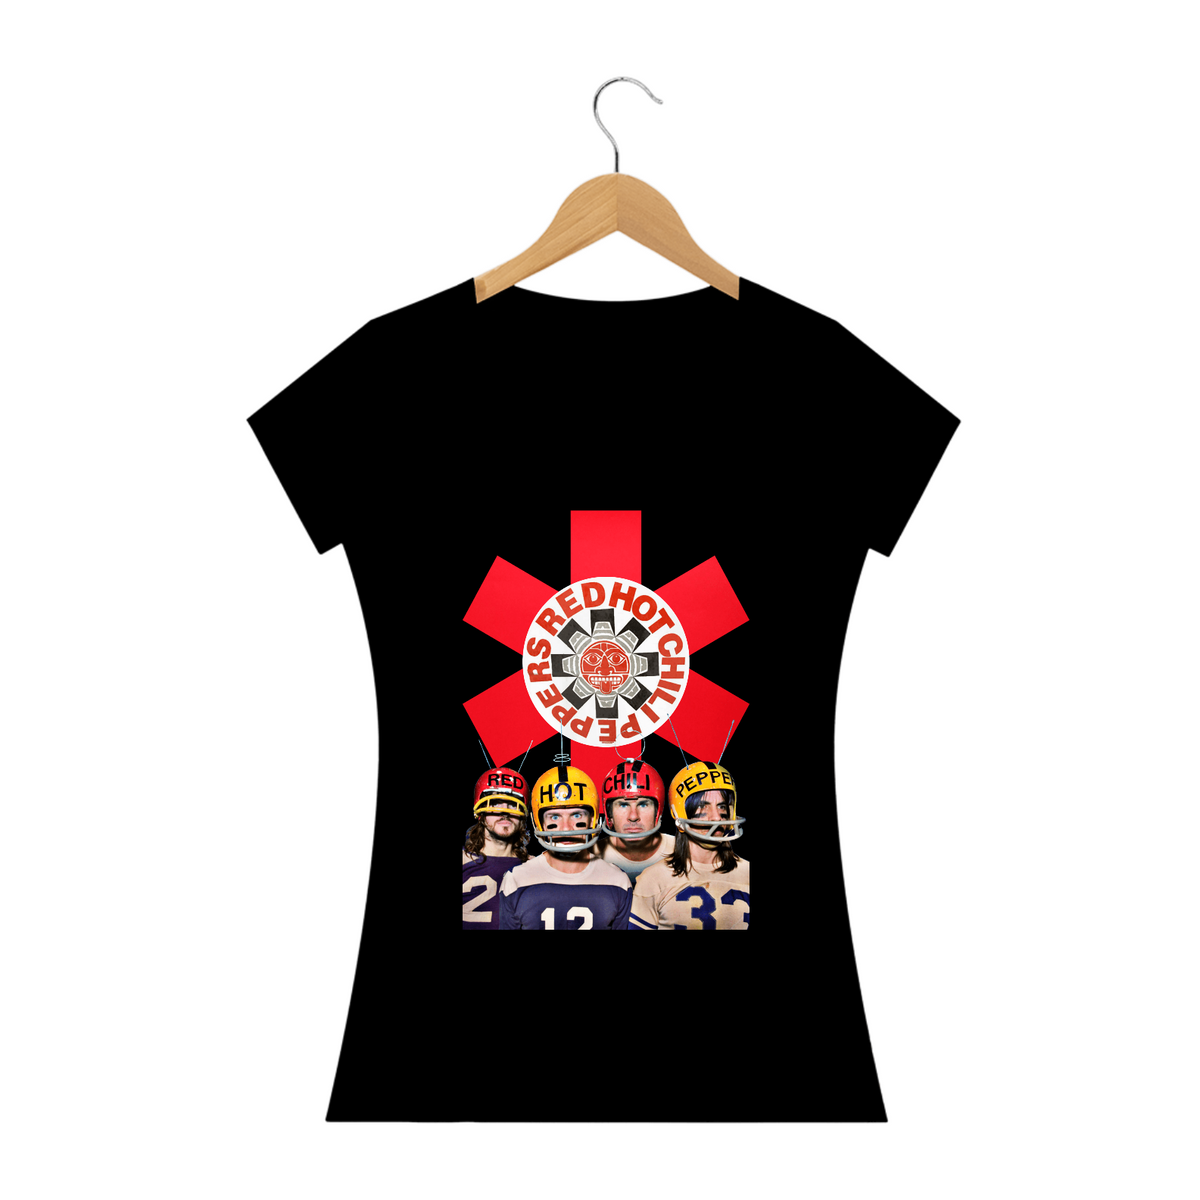 Nome do produto: Camiseta Baby Long Quality - Red Hot Chili peppers   